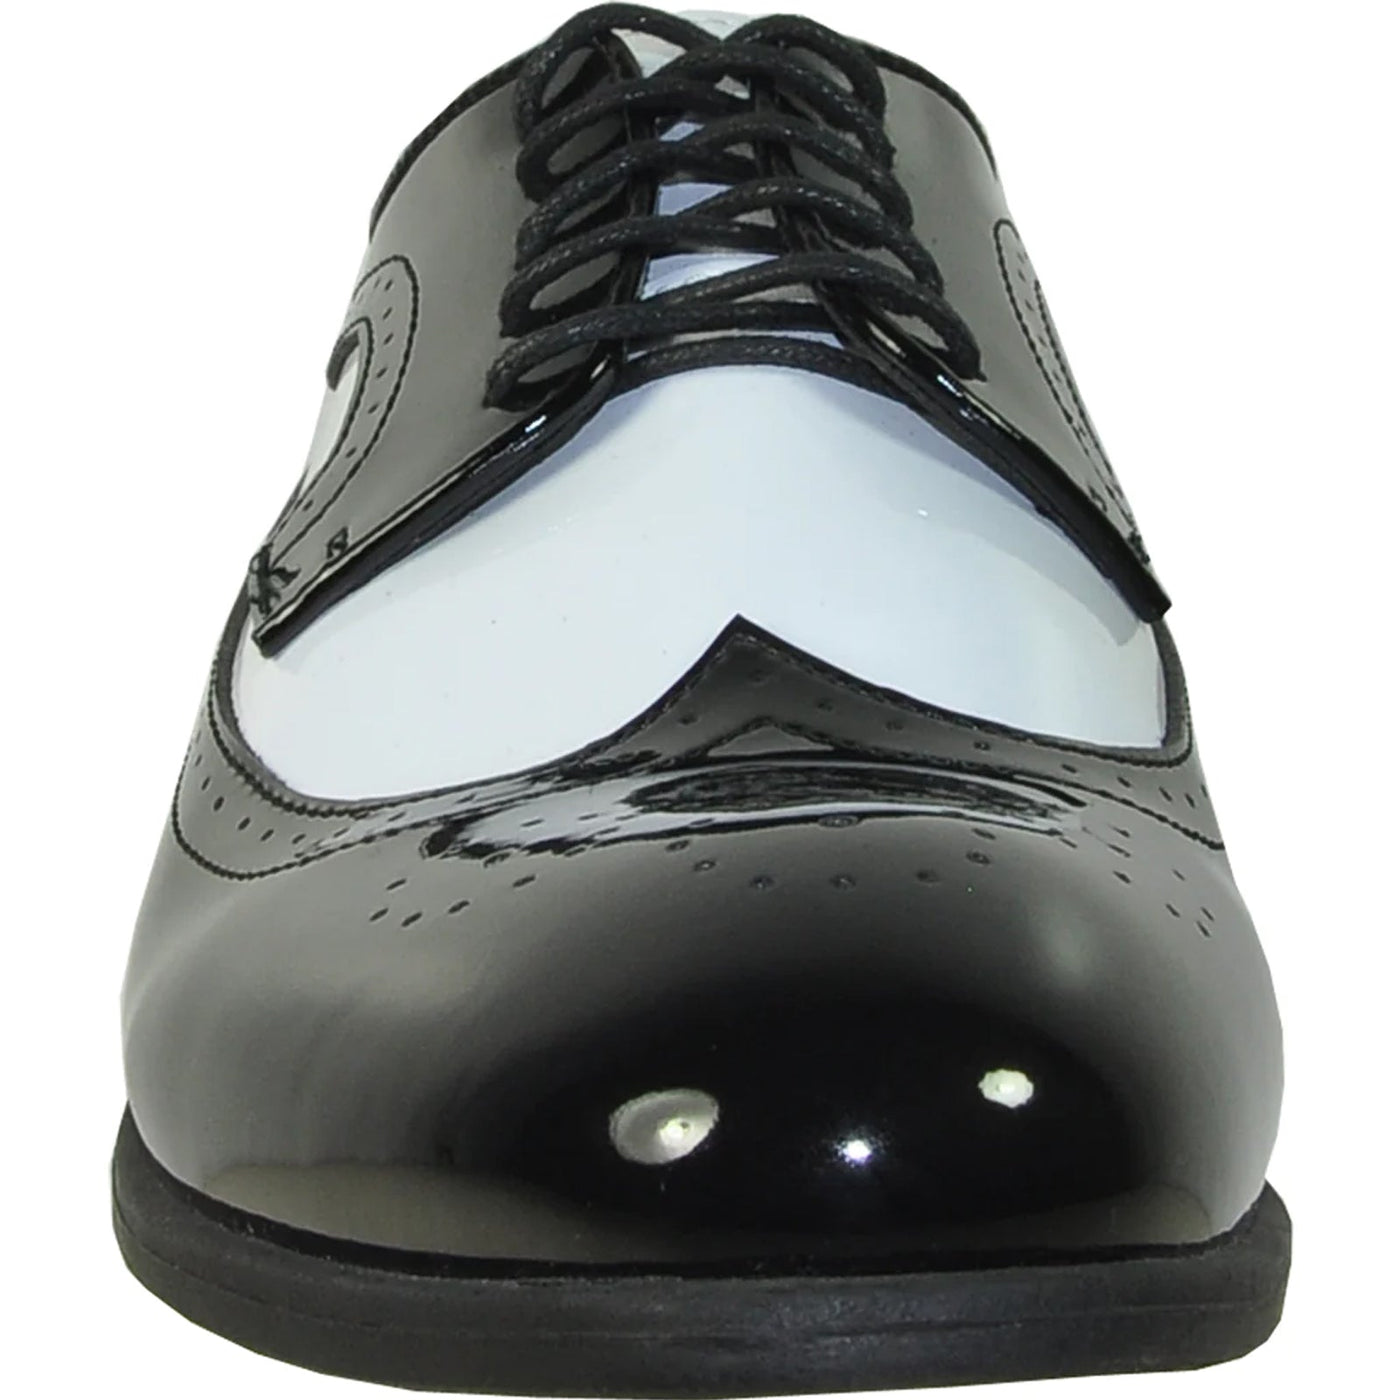 Mens 1920's Gangster Wingtip Dress Shoe in Black and White